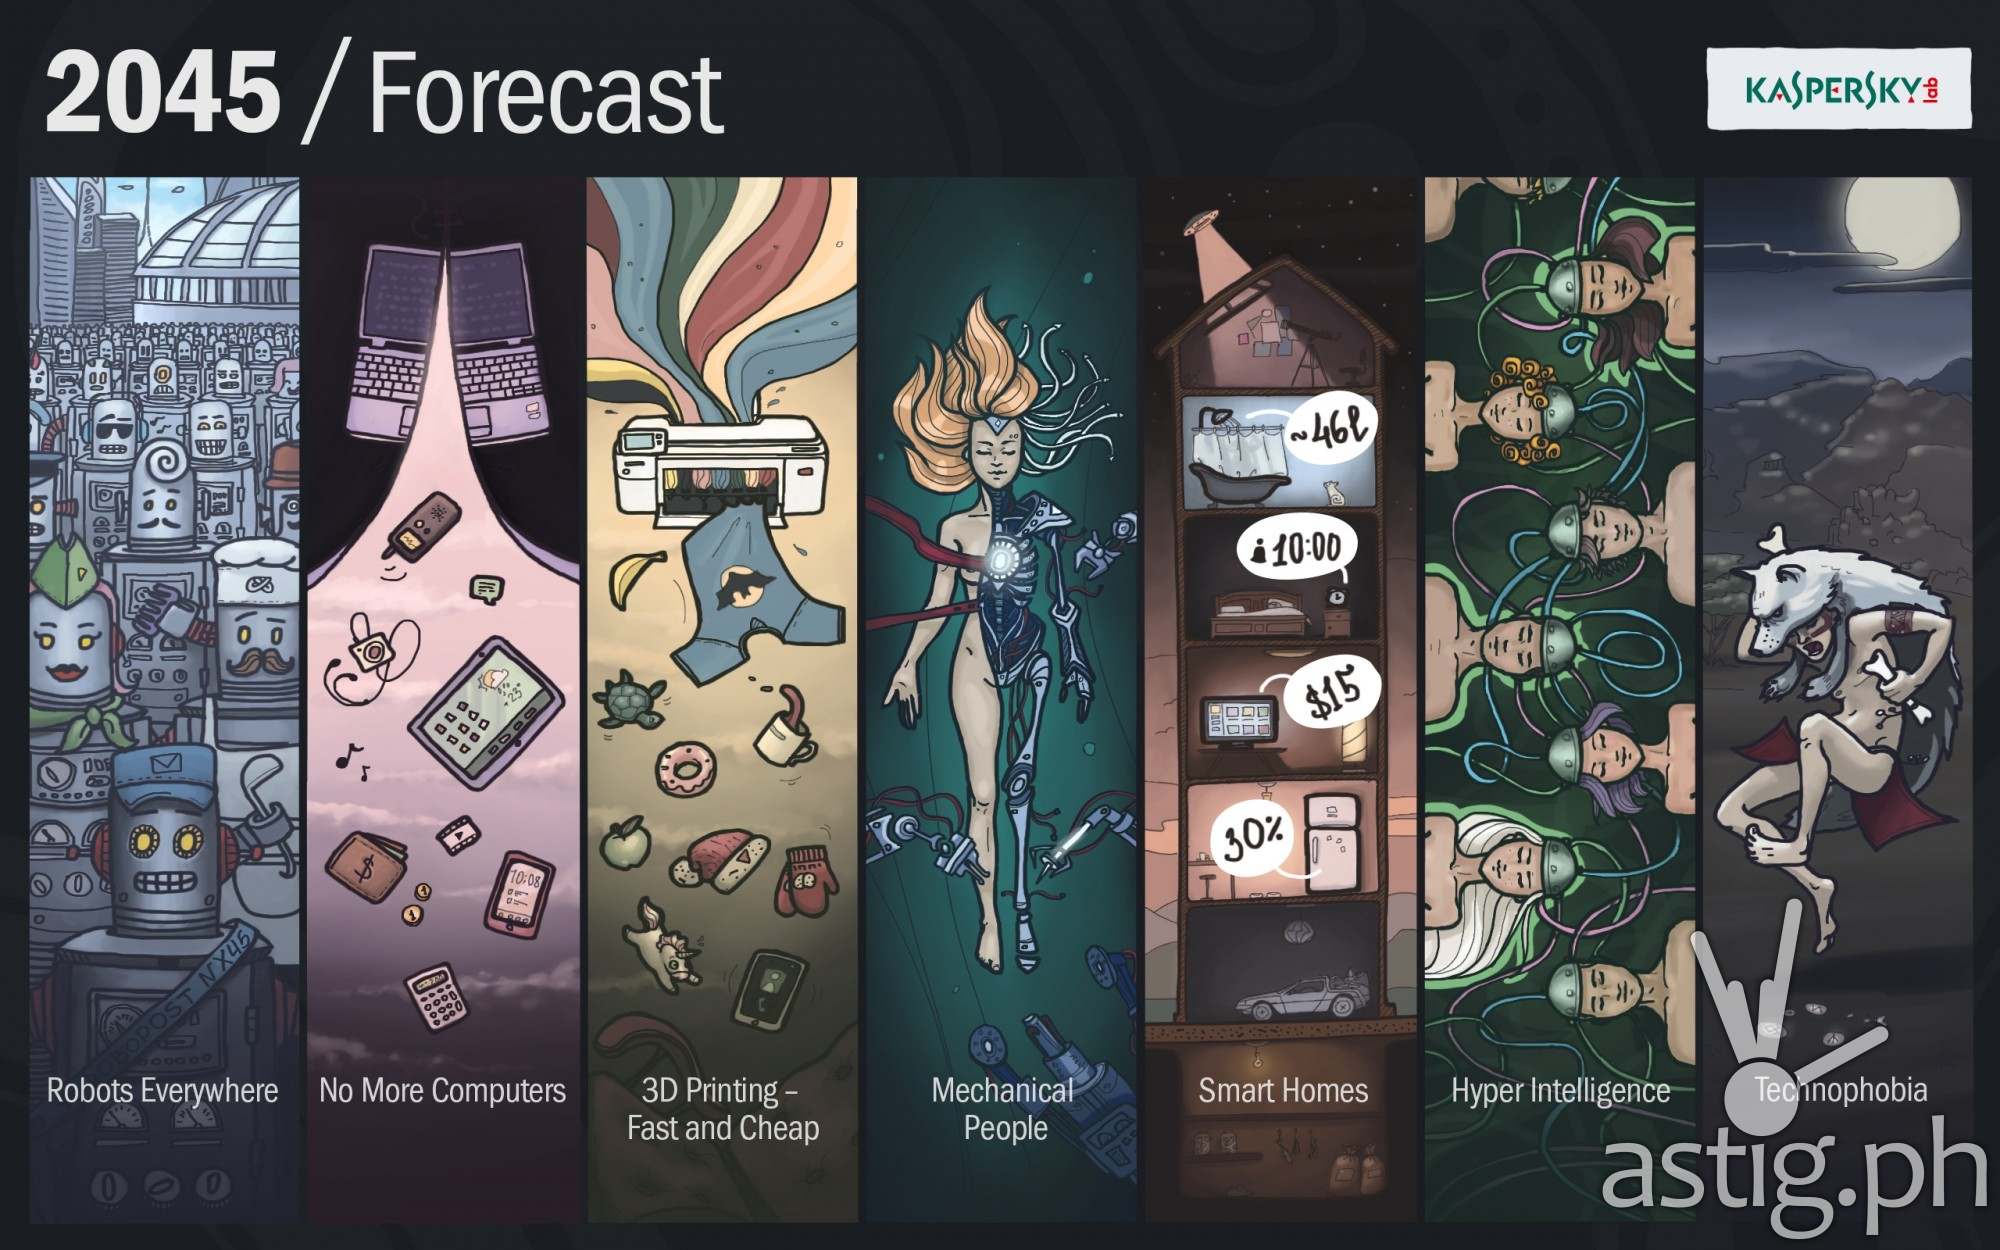 Kasperky's predictions for the year 2045: robots, cheap 3D printing, and the death of the PC